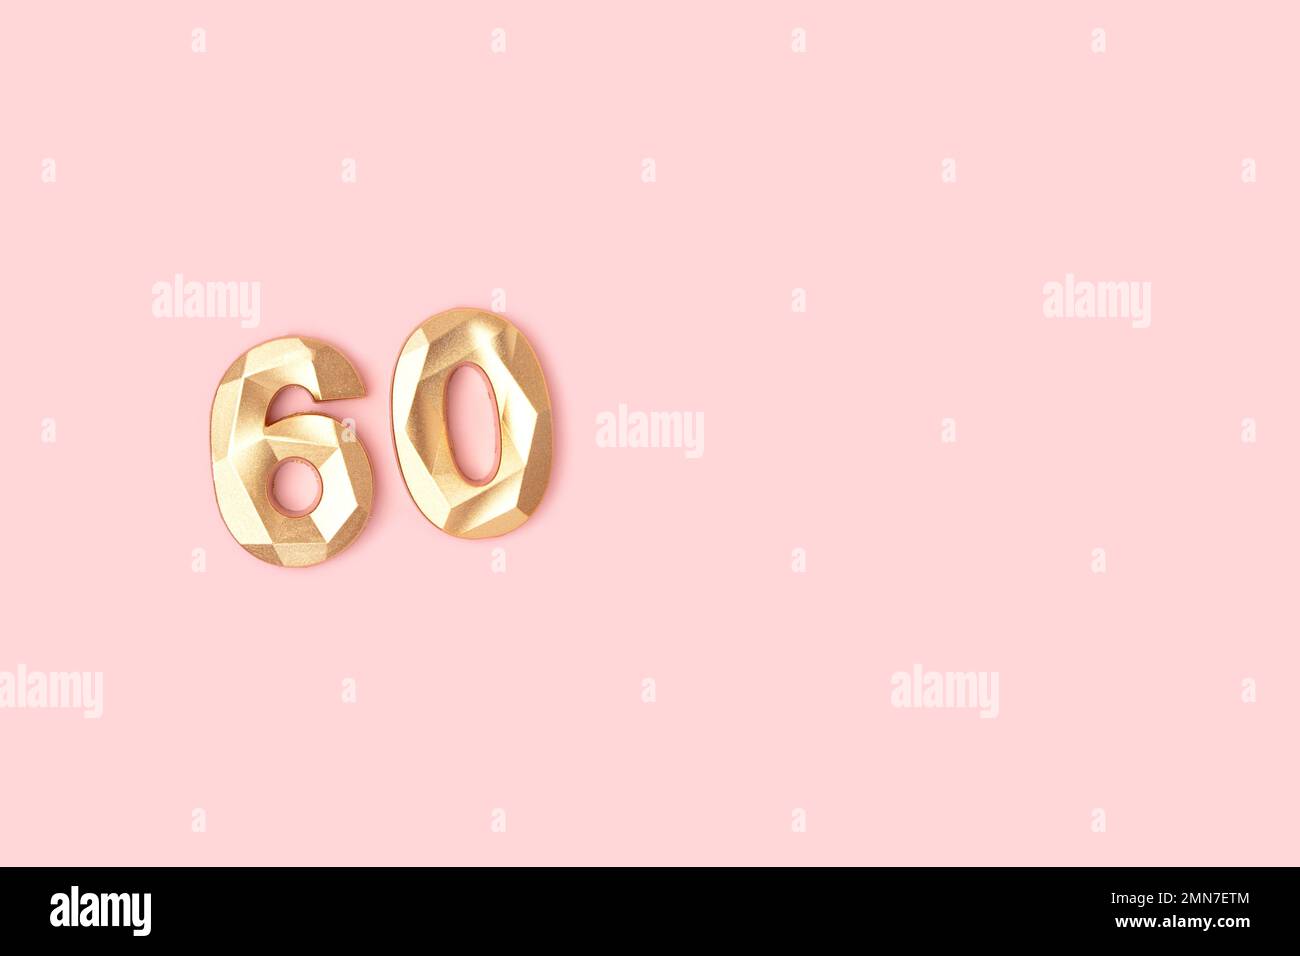 Golden number 60 on a pink background. Minimal composition. Stock Photo